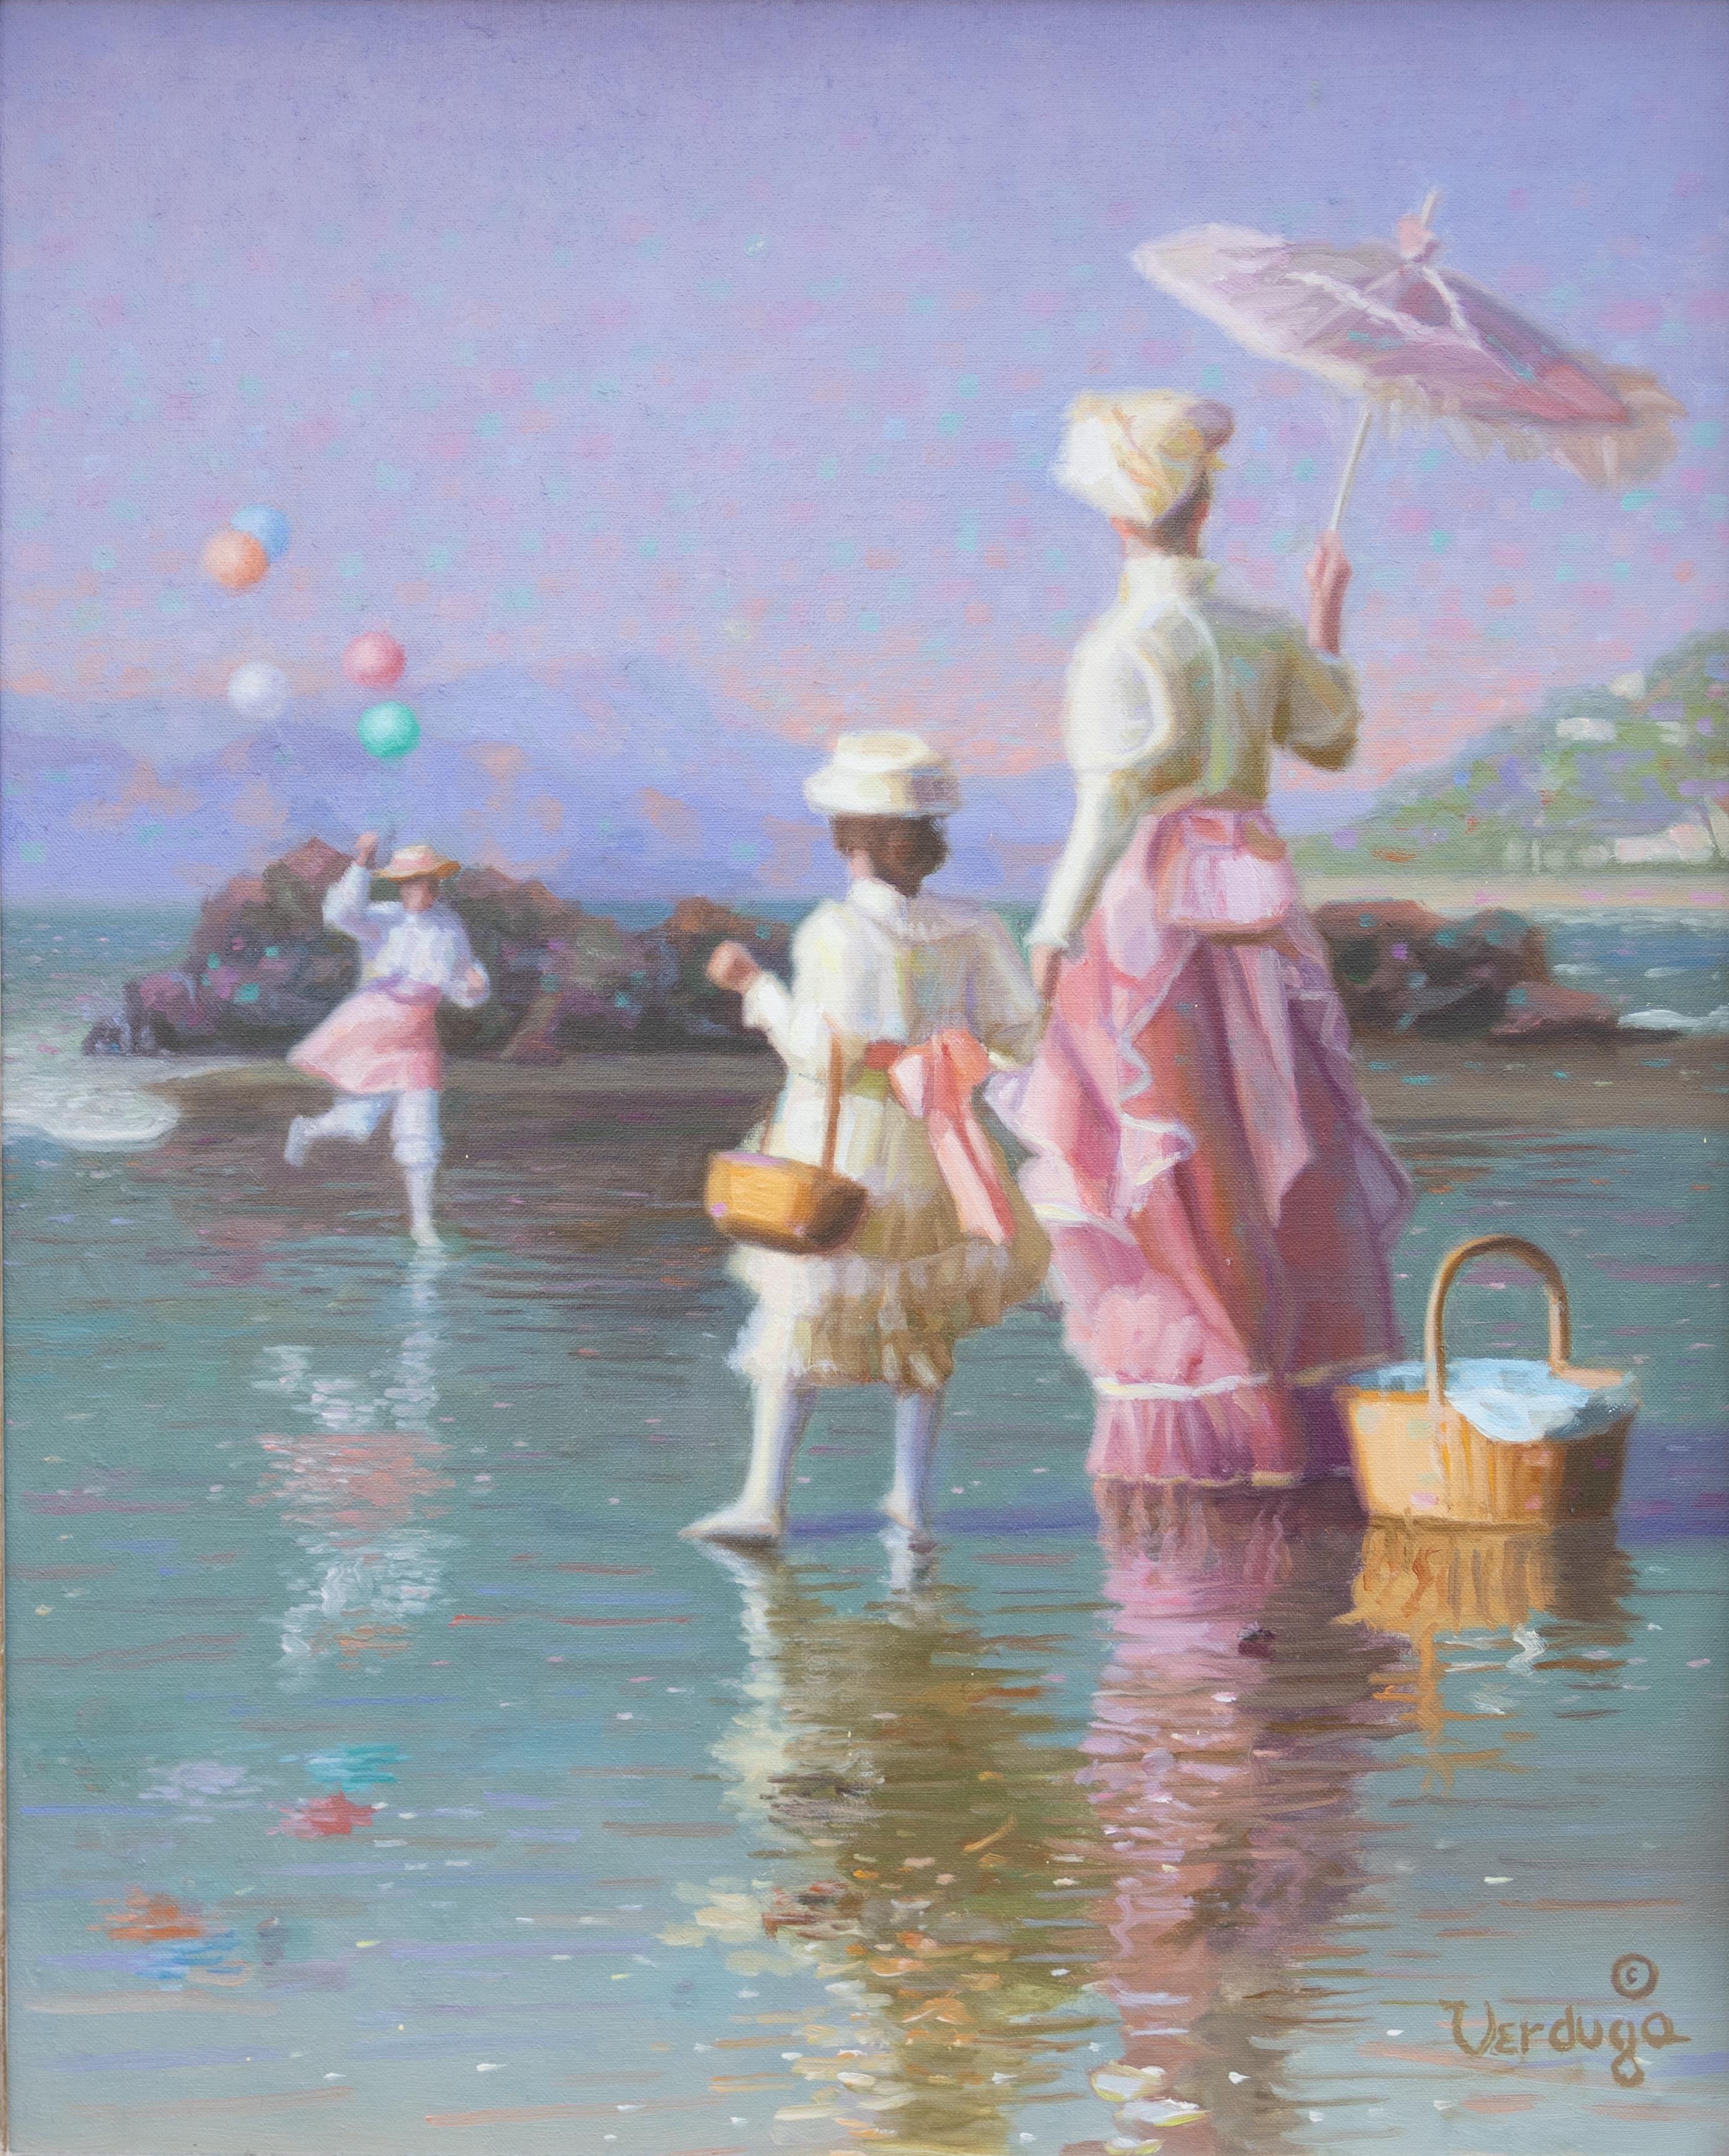 James Verdugo Figurative Painting - "Beach Party" Scene of Mother with Children and Balloons on the Beach